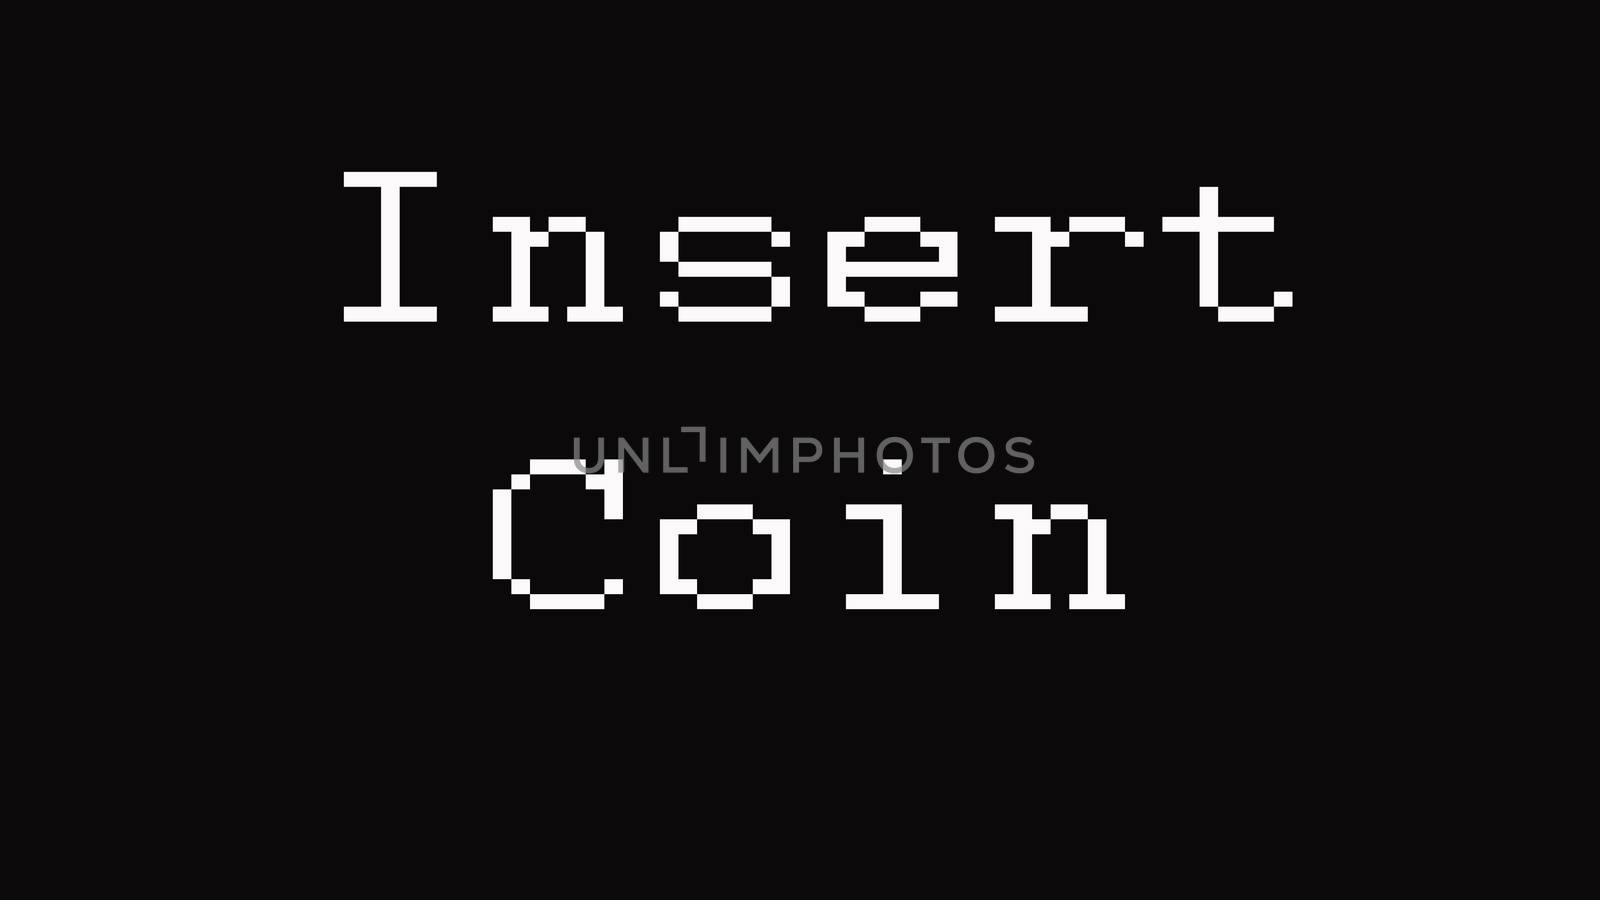 Insert Coin Classic Arcade. Game Over in text titles. by dacasdo